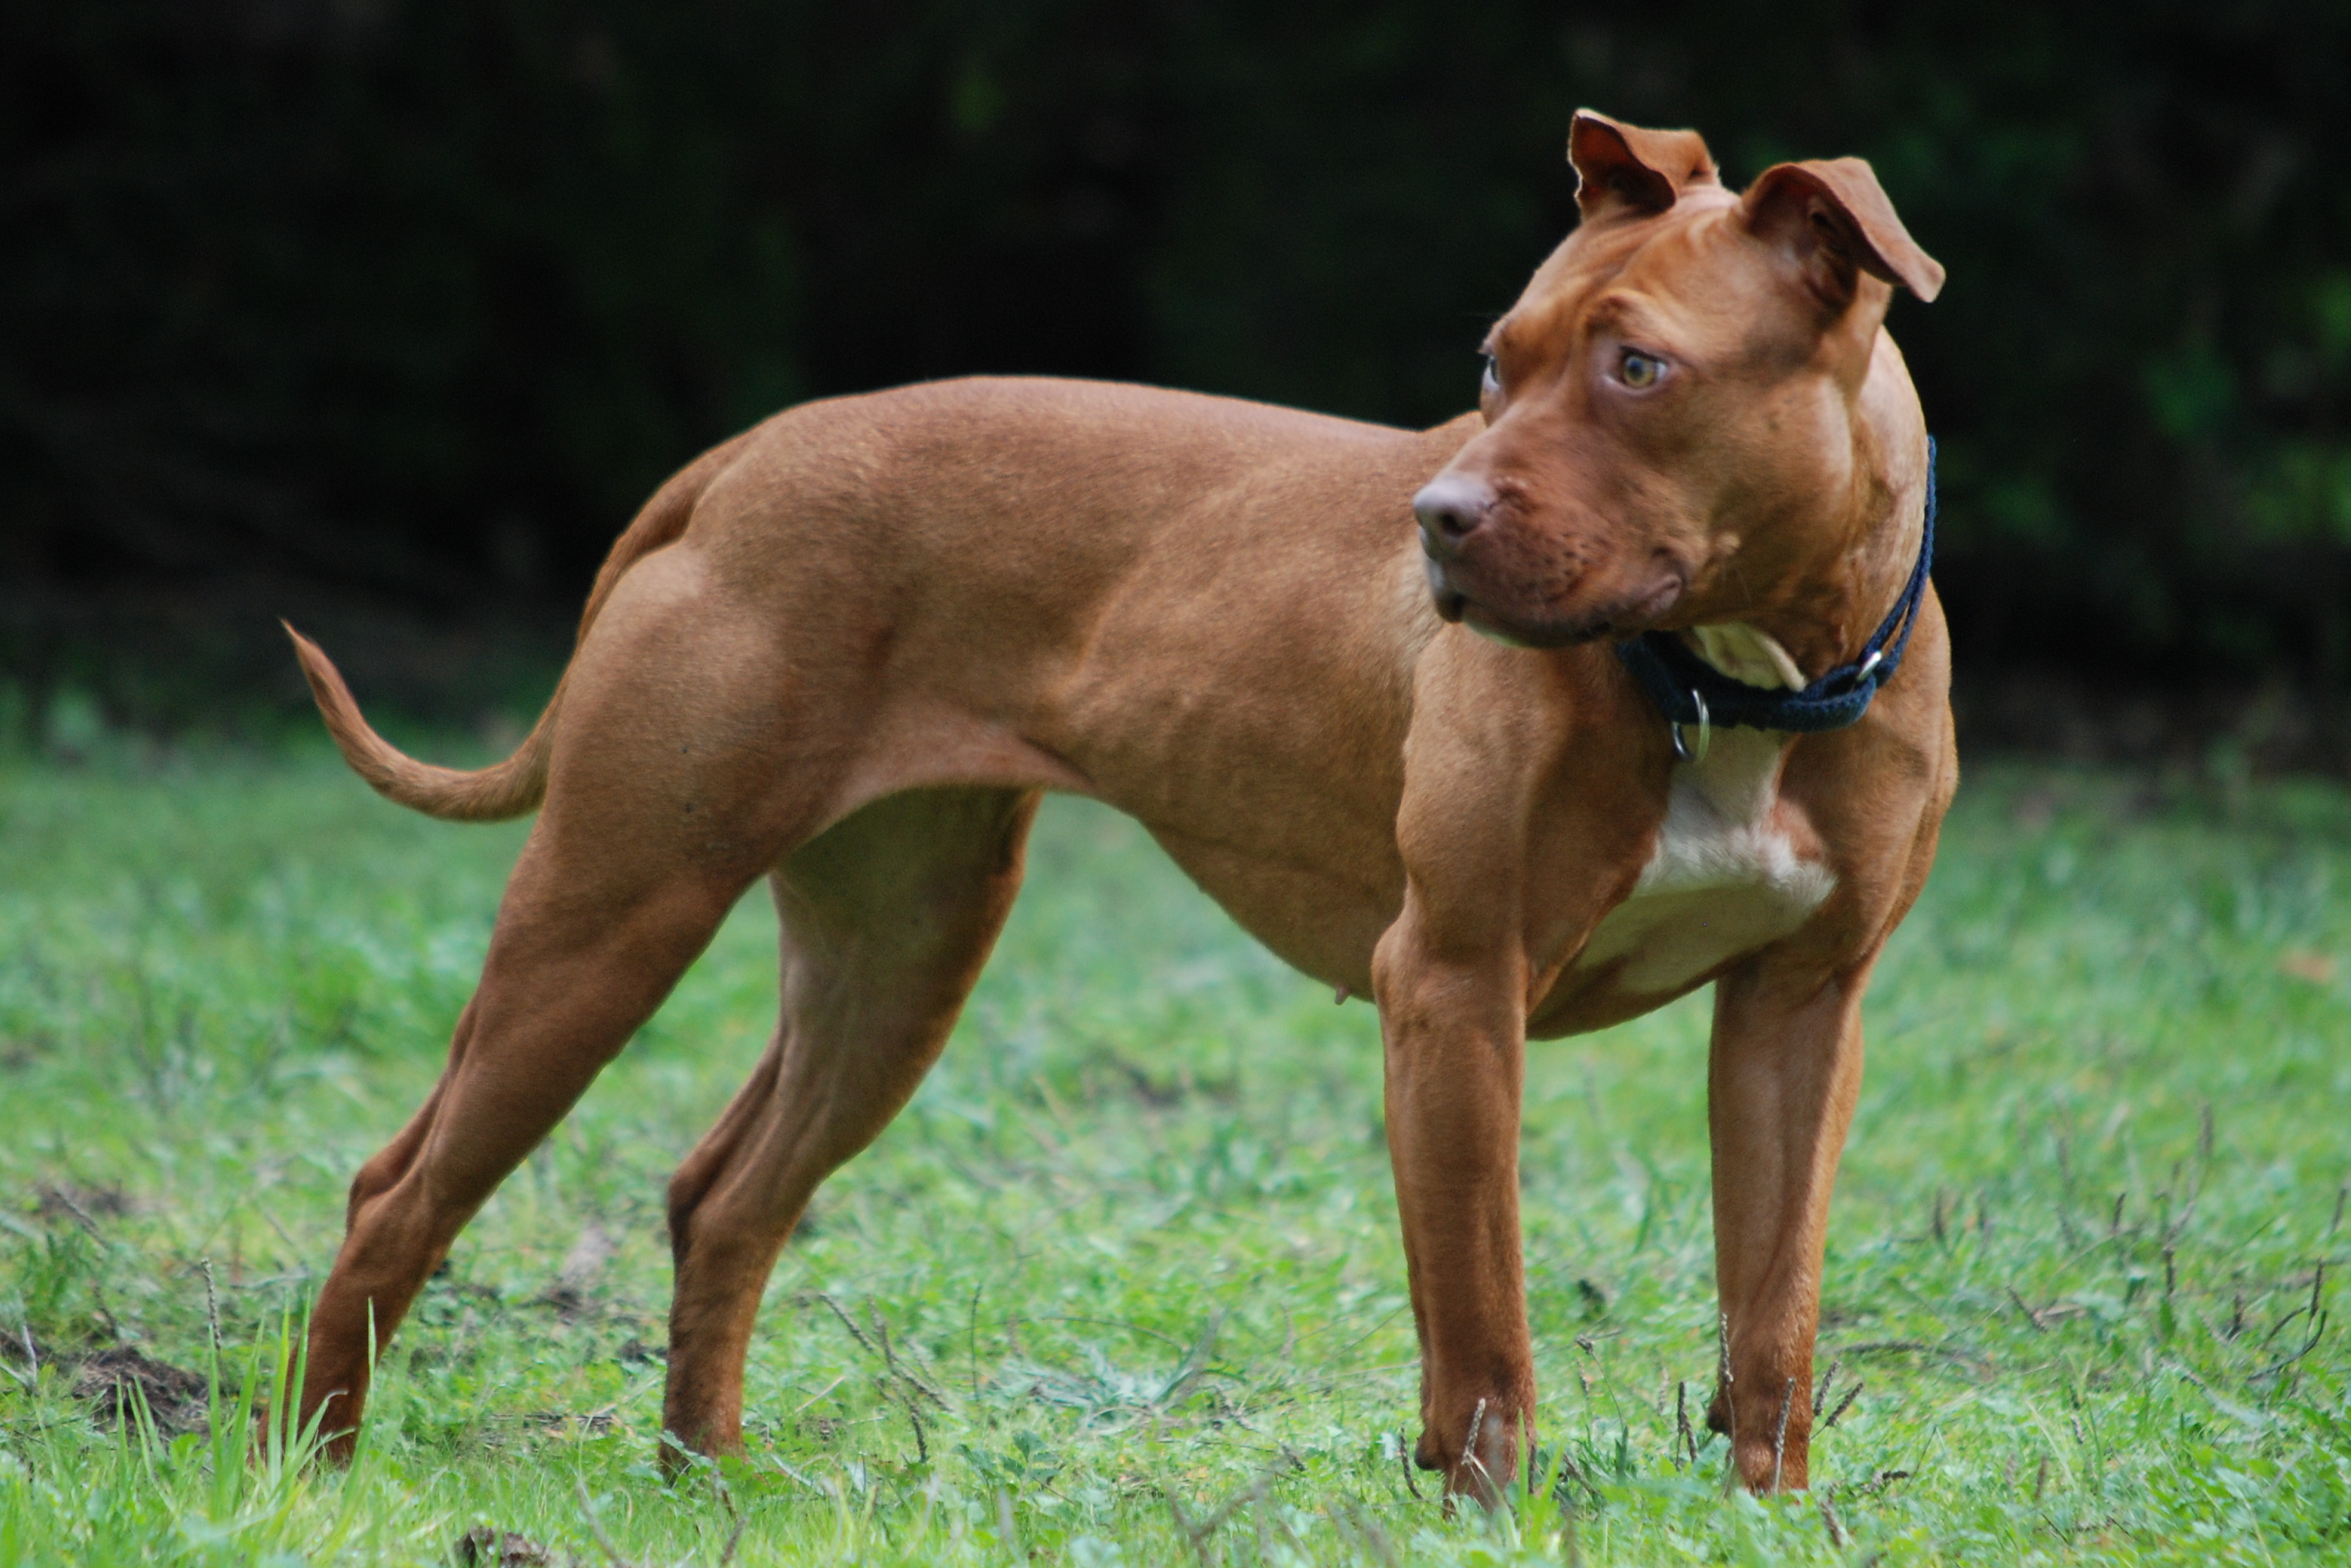 File:000 American Pit Bull Terrier.jpg - Wikimedia Commons......PITBULL vs ROTTWEILER - Which is more powerful?